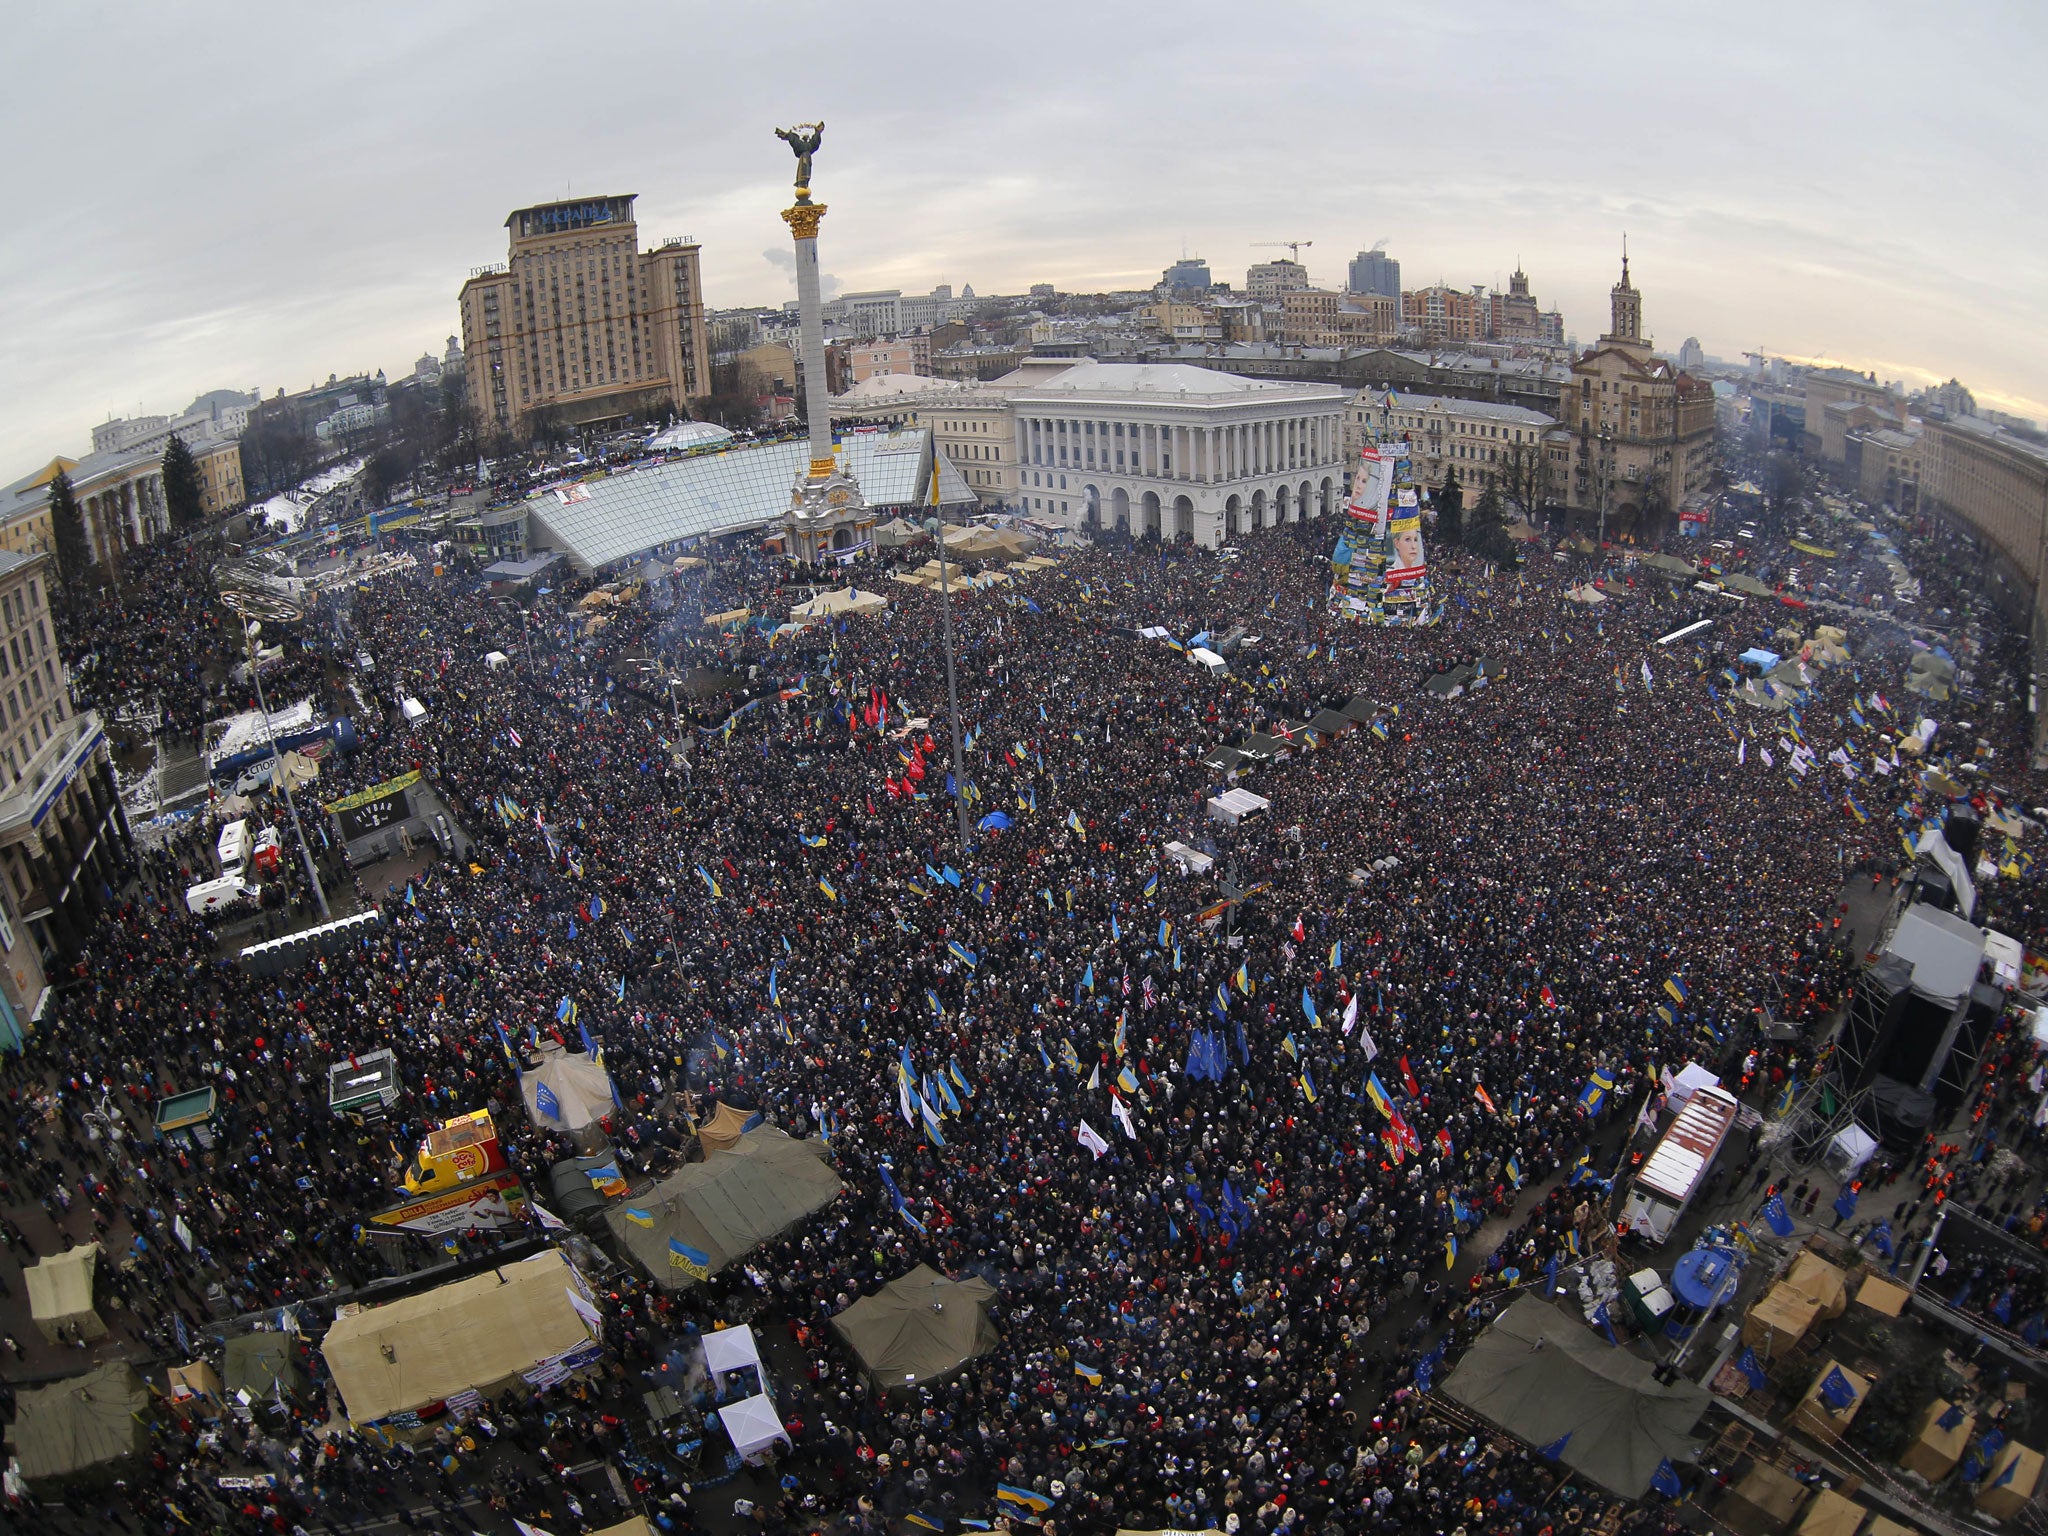 An estimated 200,000 anti-government demonstrators converge on Independence Square in central Kiev